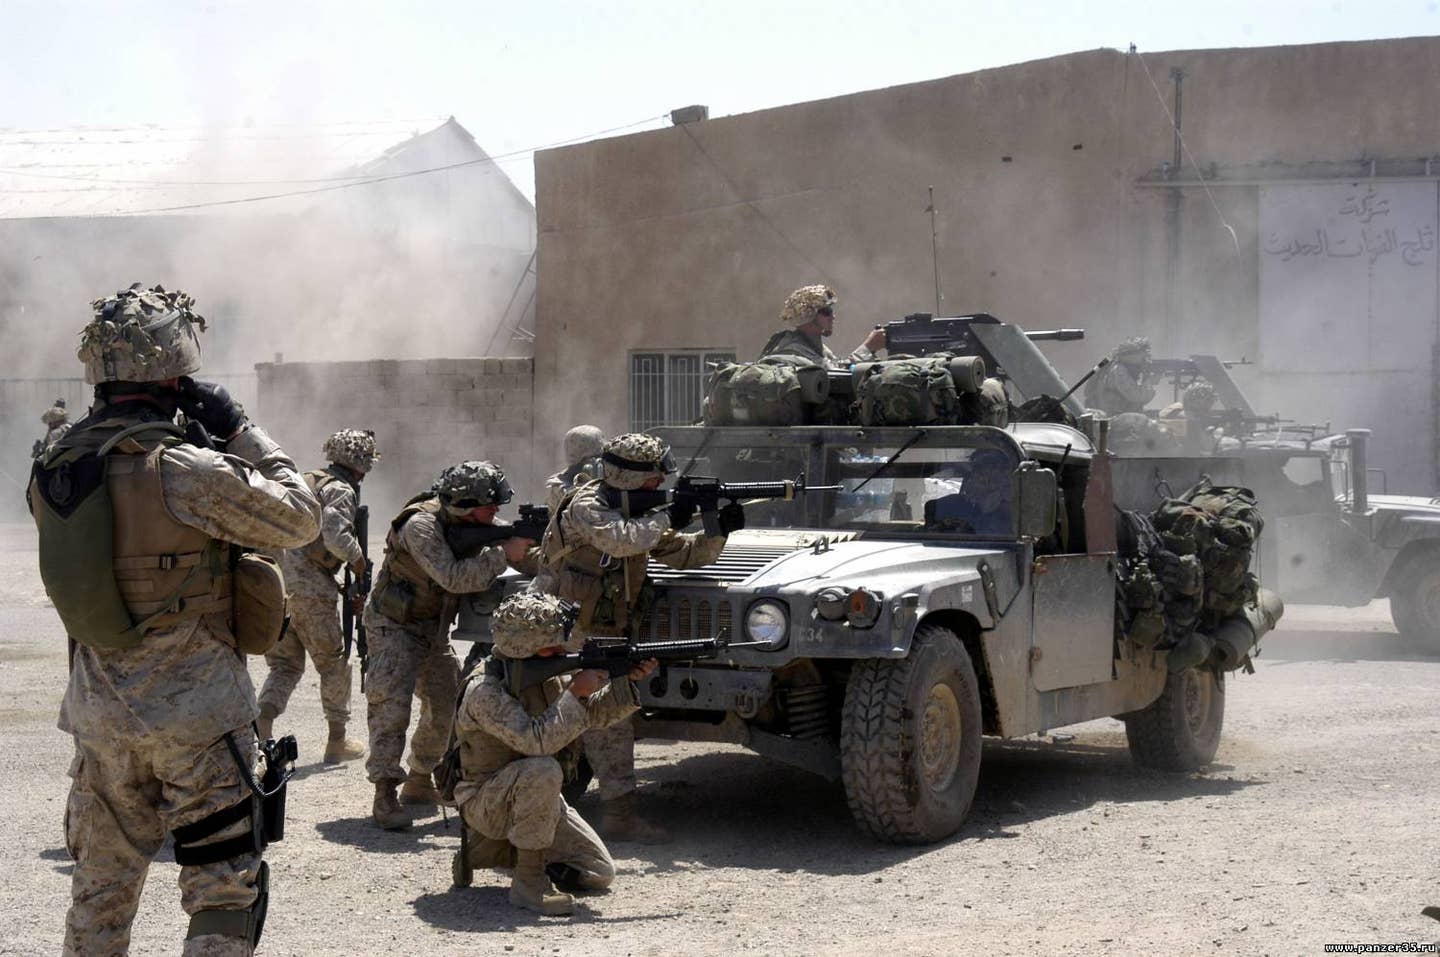 U.S. Marines with Company A, 1st Battalion, 5th Marine Regiment. Marine Captain Philip Treglia calls in an airstrike while his Marines fire against terrorists operating in Fallujah on April 7, 2004. <em>Credit: U.S. Marine Corps photo by Cpl. Matthew J. Apprendi/Wikimedia Commons</em>